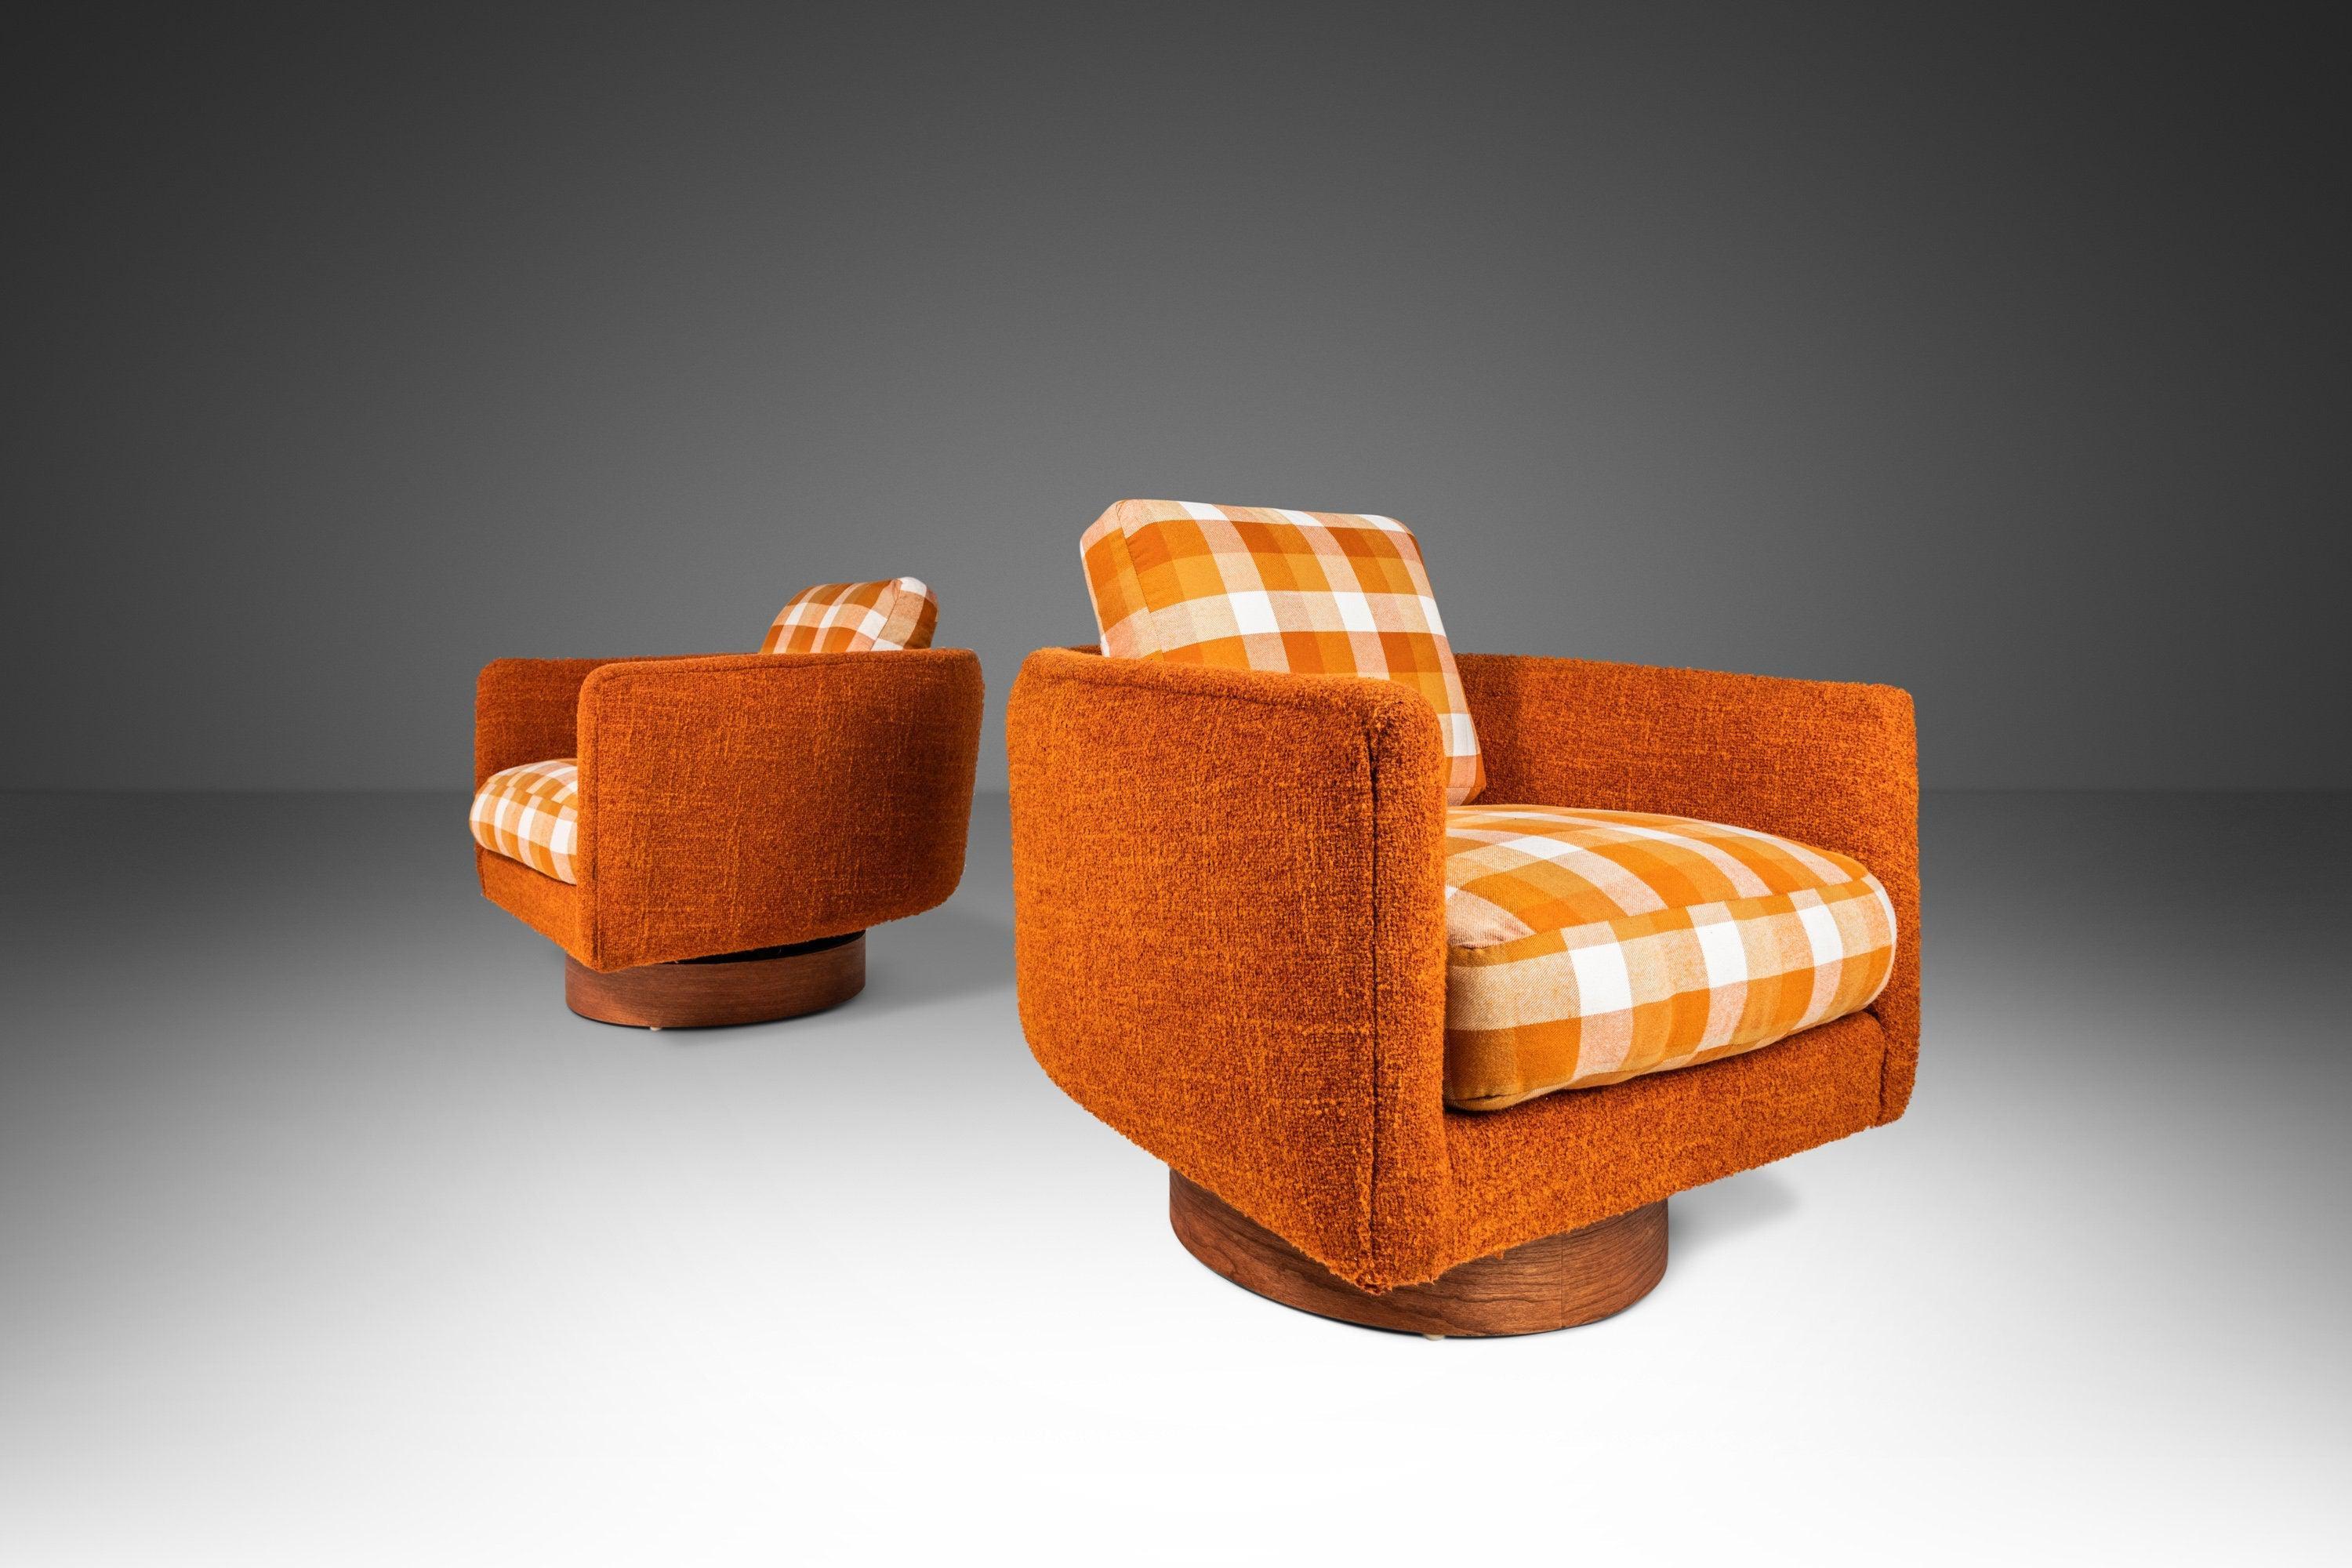 Equal parts comfort and style this remarkable set of tub chairs is epitome of American Modern Design. Complete with the original retro burnt orange tweed upholstery these fascinating chairs are even more than meets the eye. Both chairs swivel 360